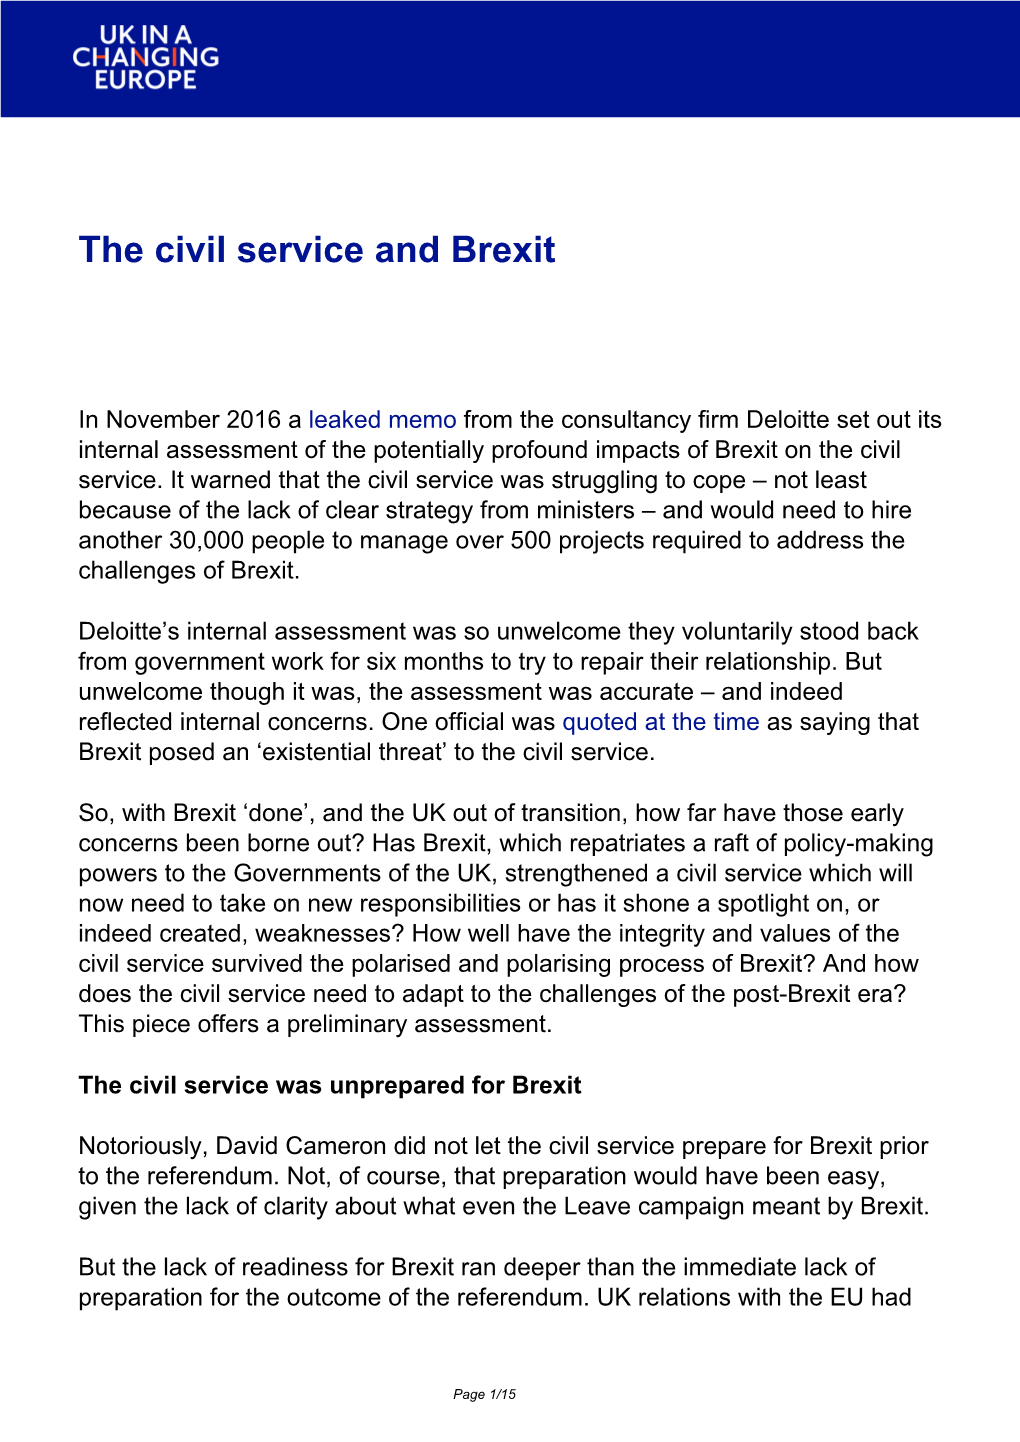 Long Read: the Civil Service and Brexit